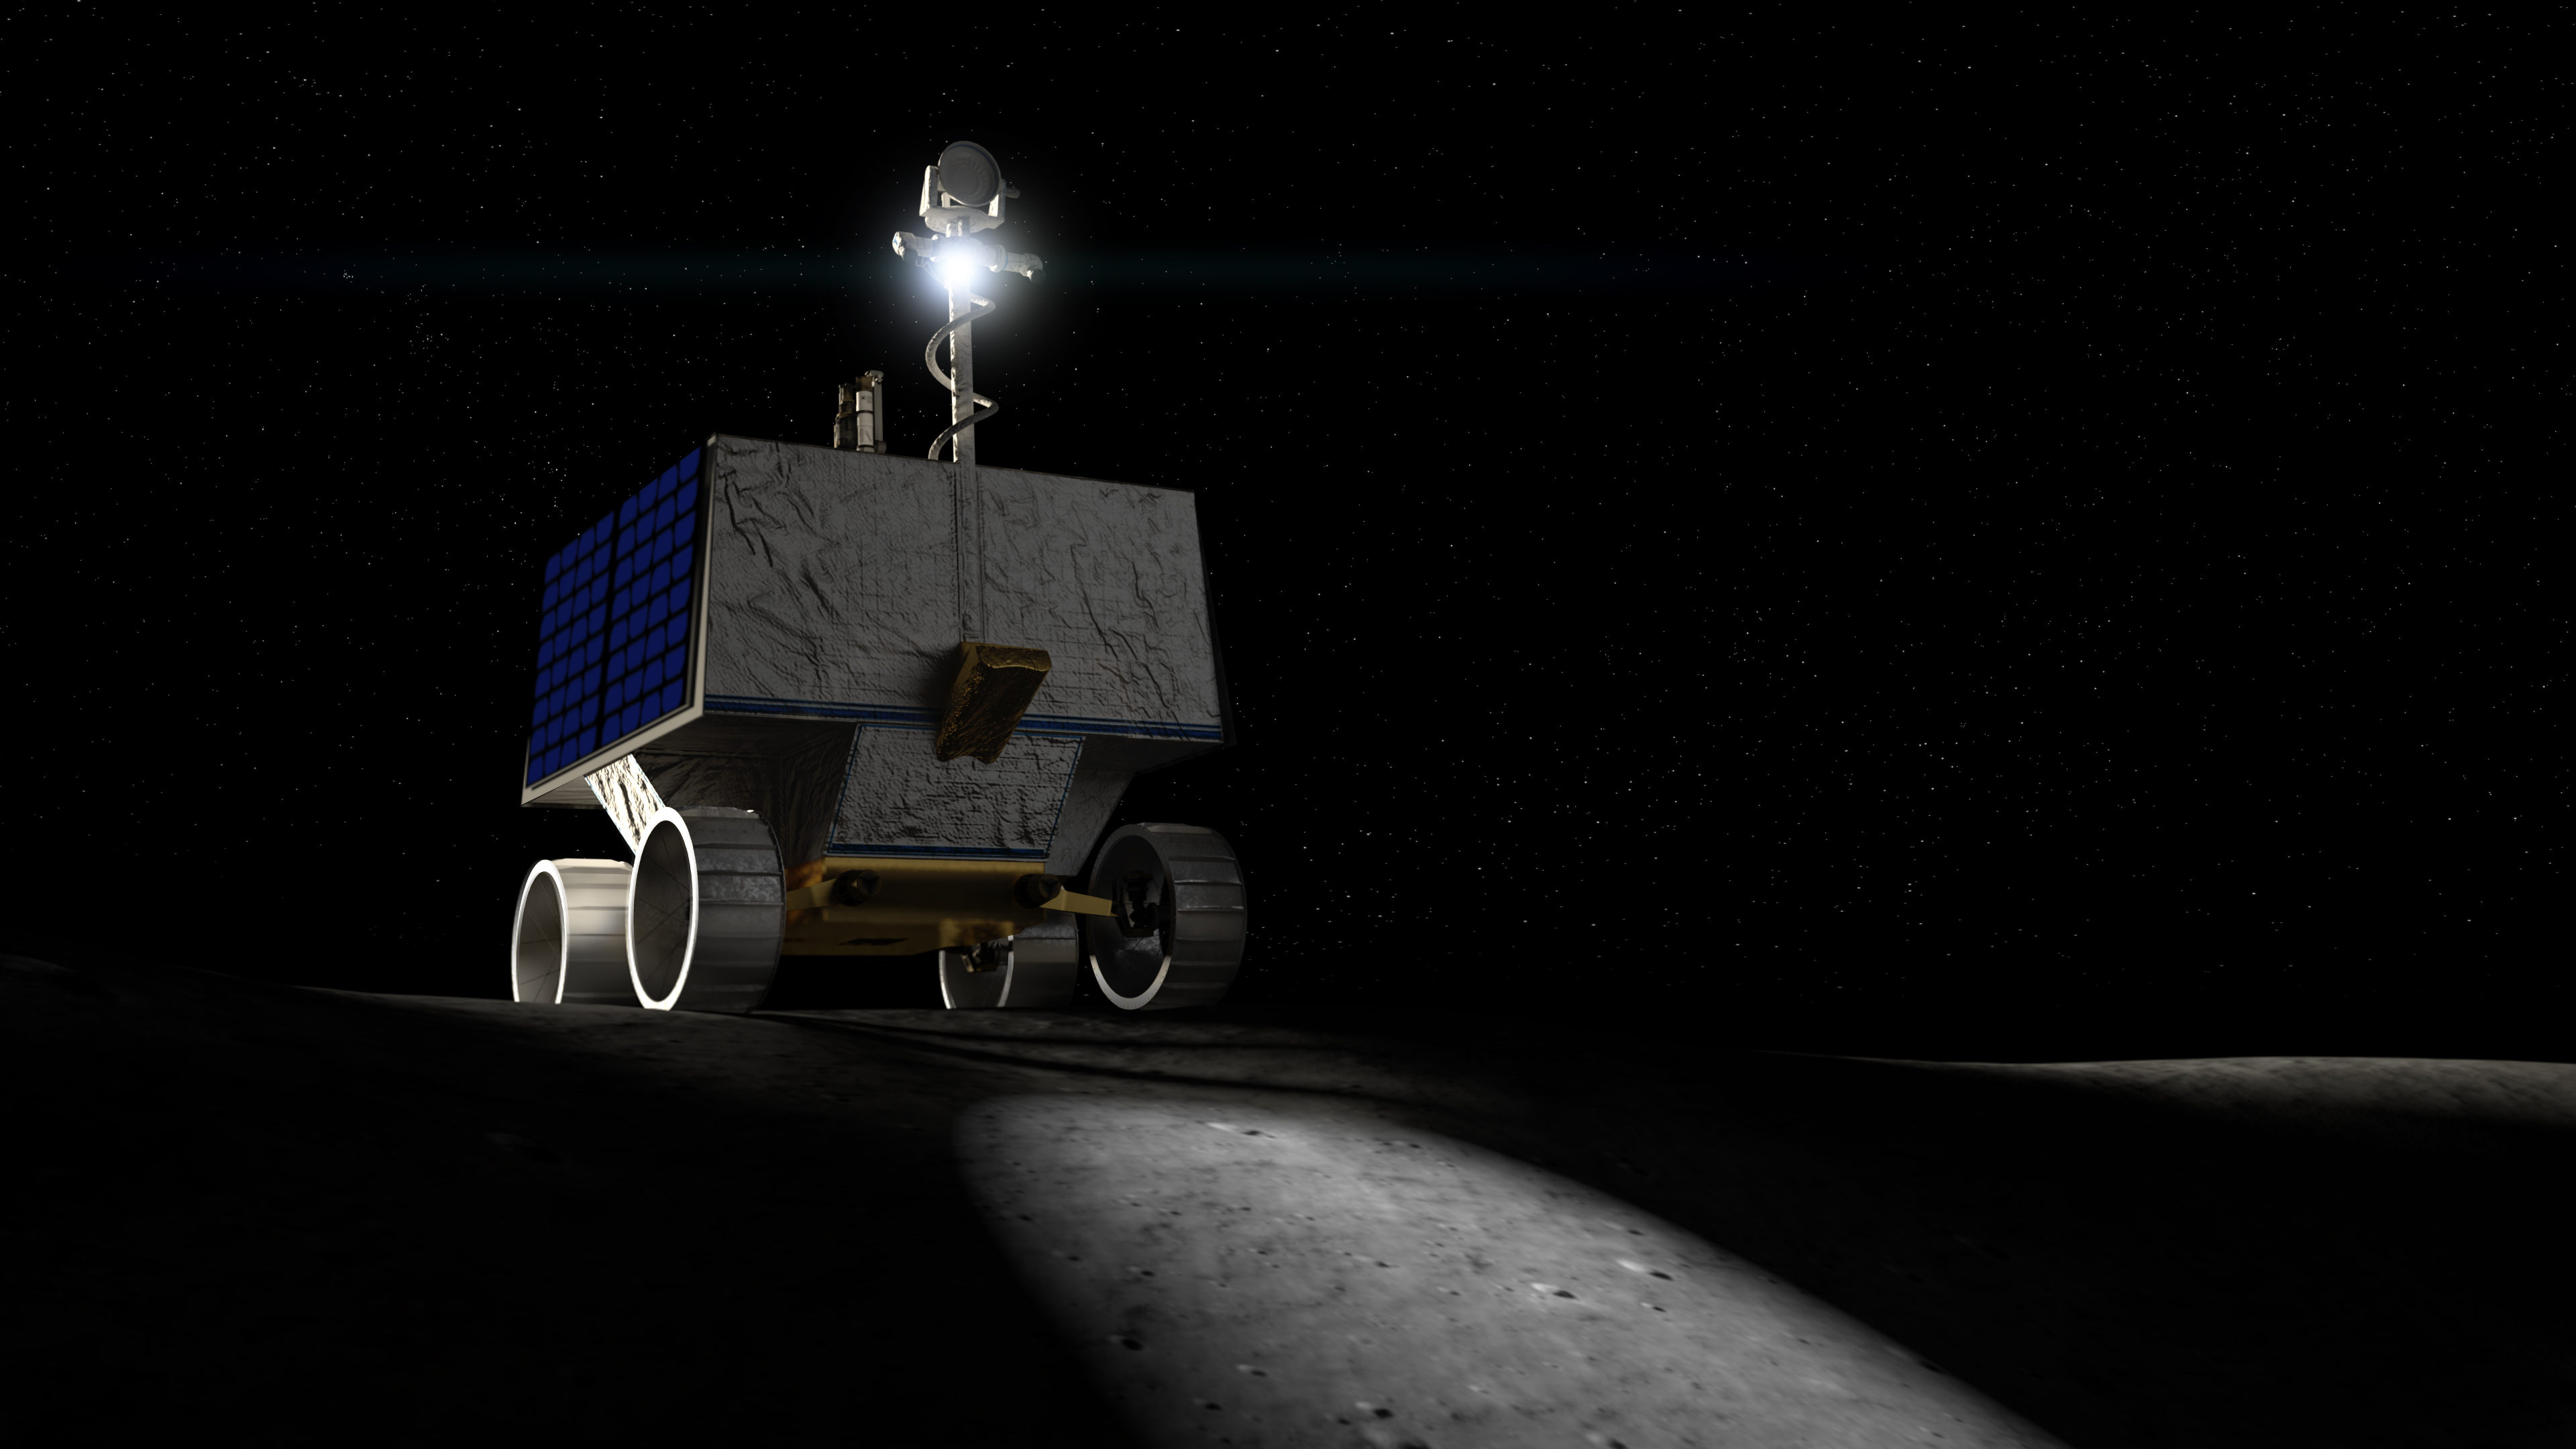 A depiction of a rover on the Moon, illuminating a portion of the surface in front of it